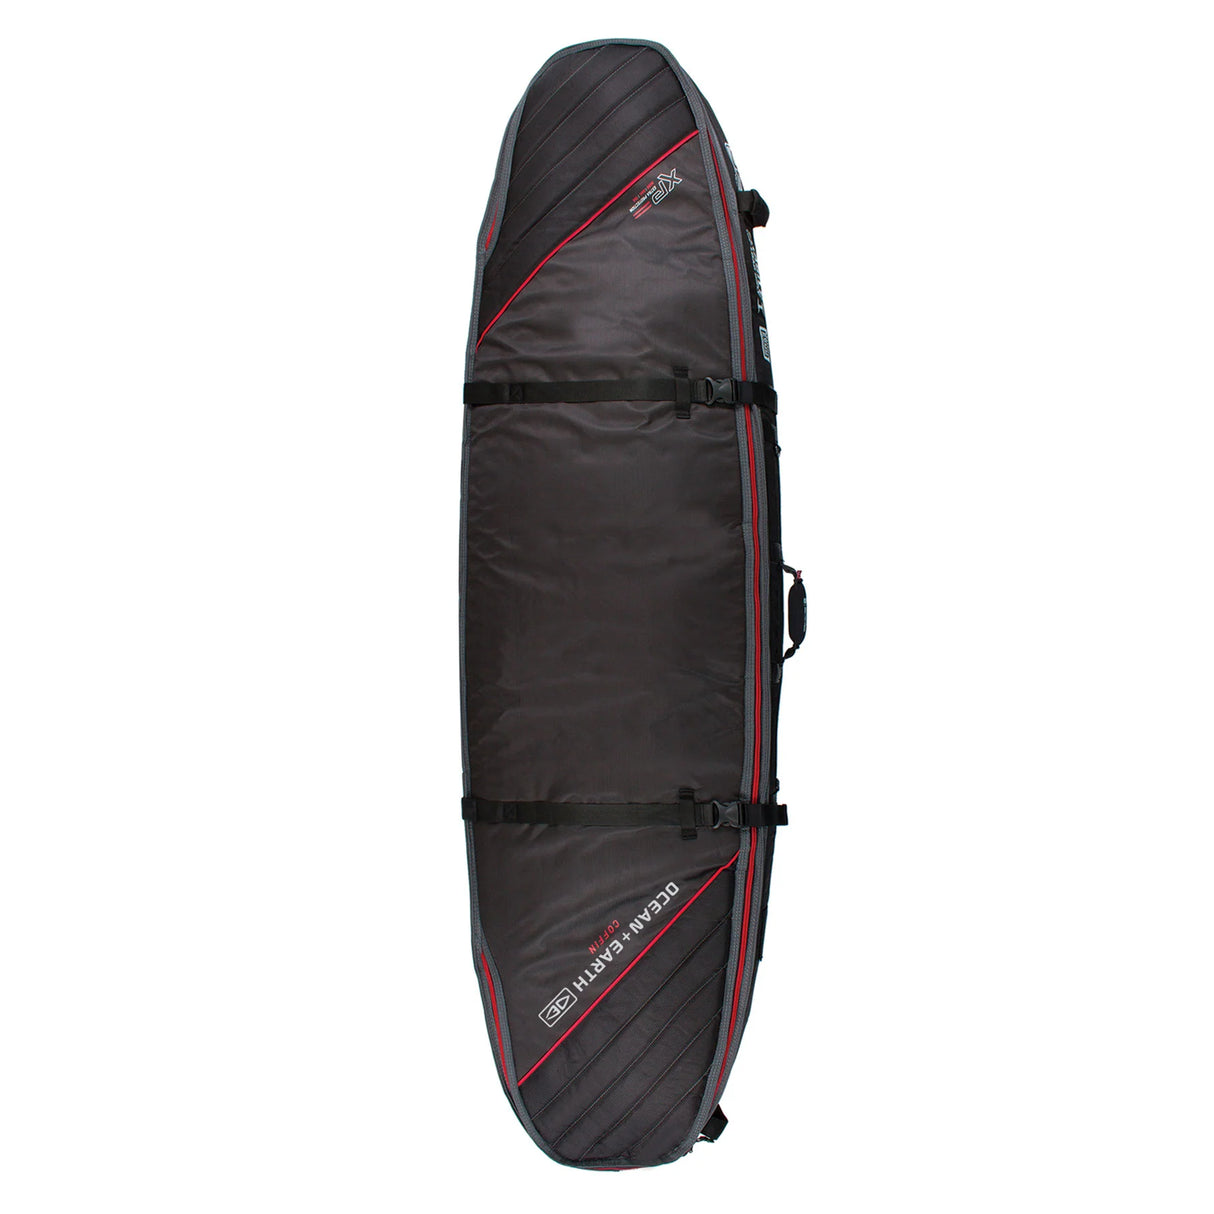 Ocean & Earth Shortboard/Fish Double Coffin Cover